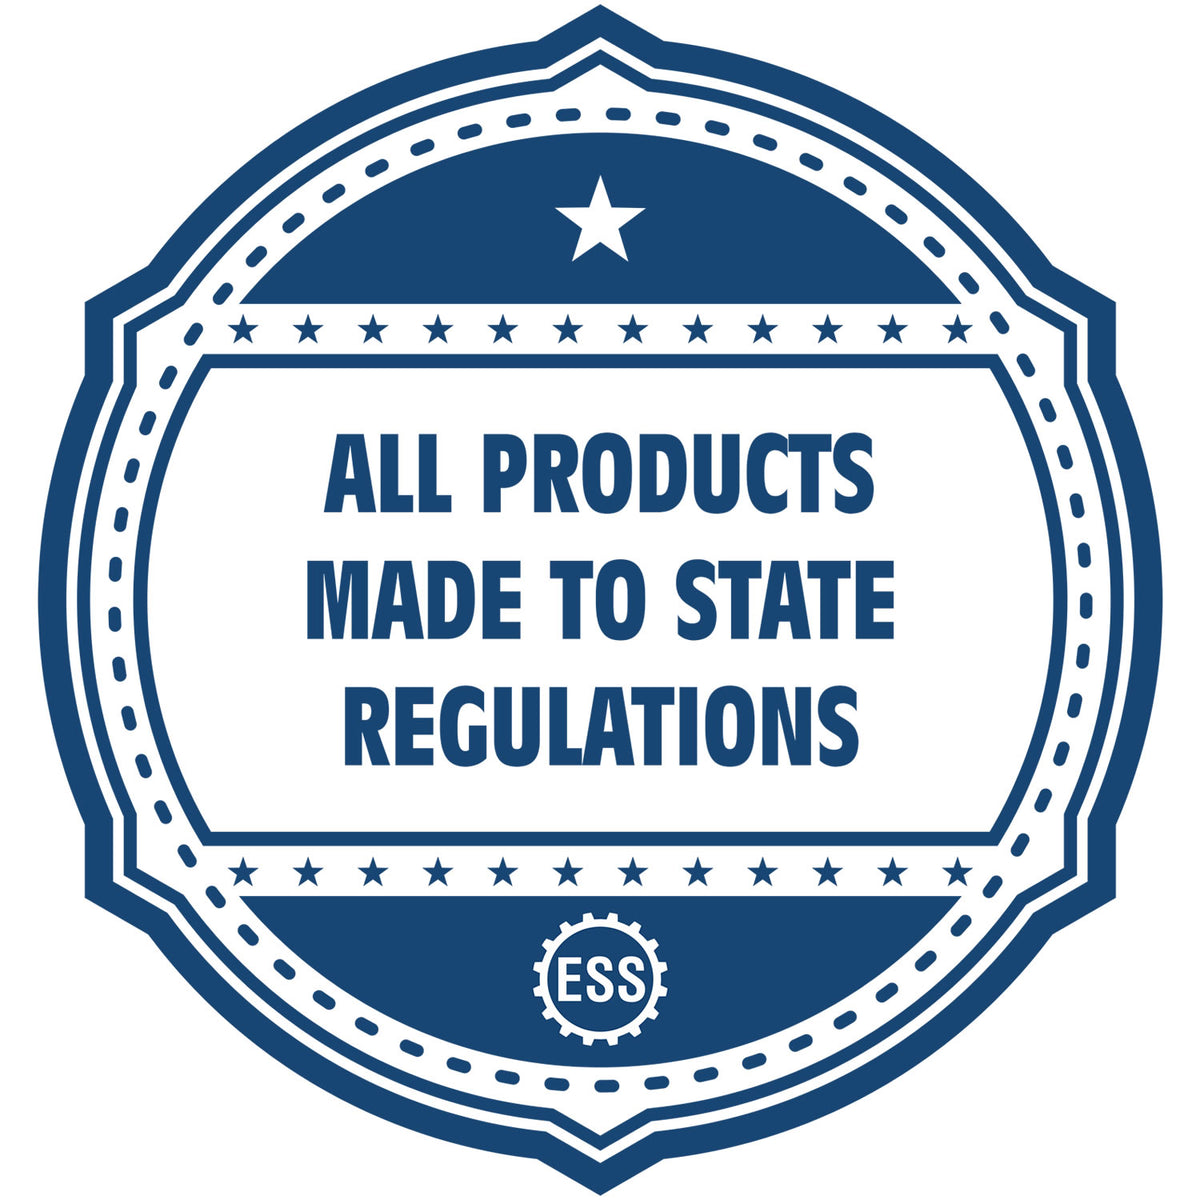 An icon or badge element for the Premium MaxLight Pre-Inked Illinois Landscape Architectural Stamp showing that this product is made in compliance with state regulations.